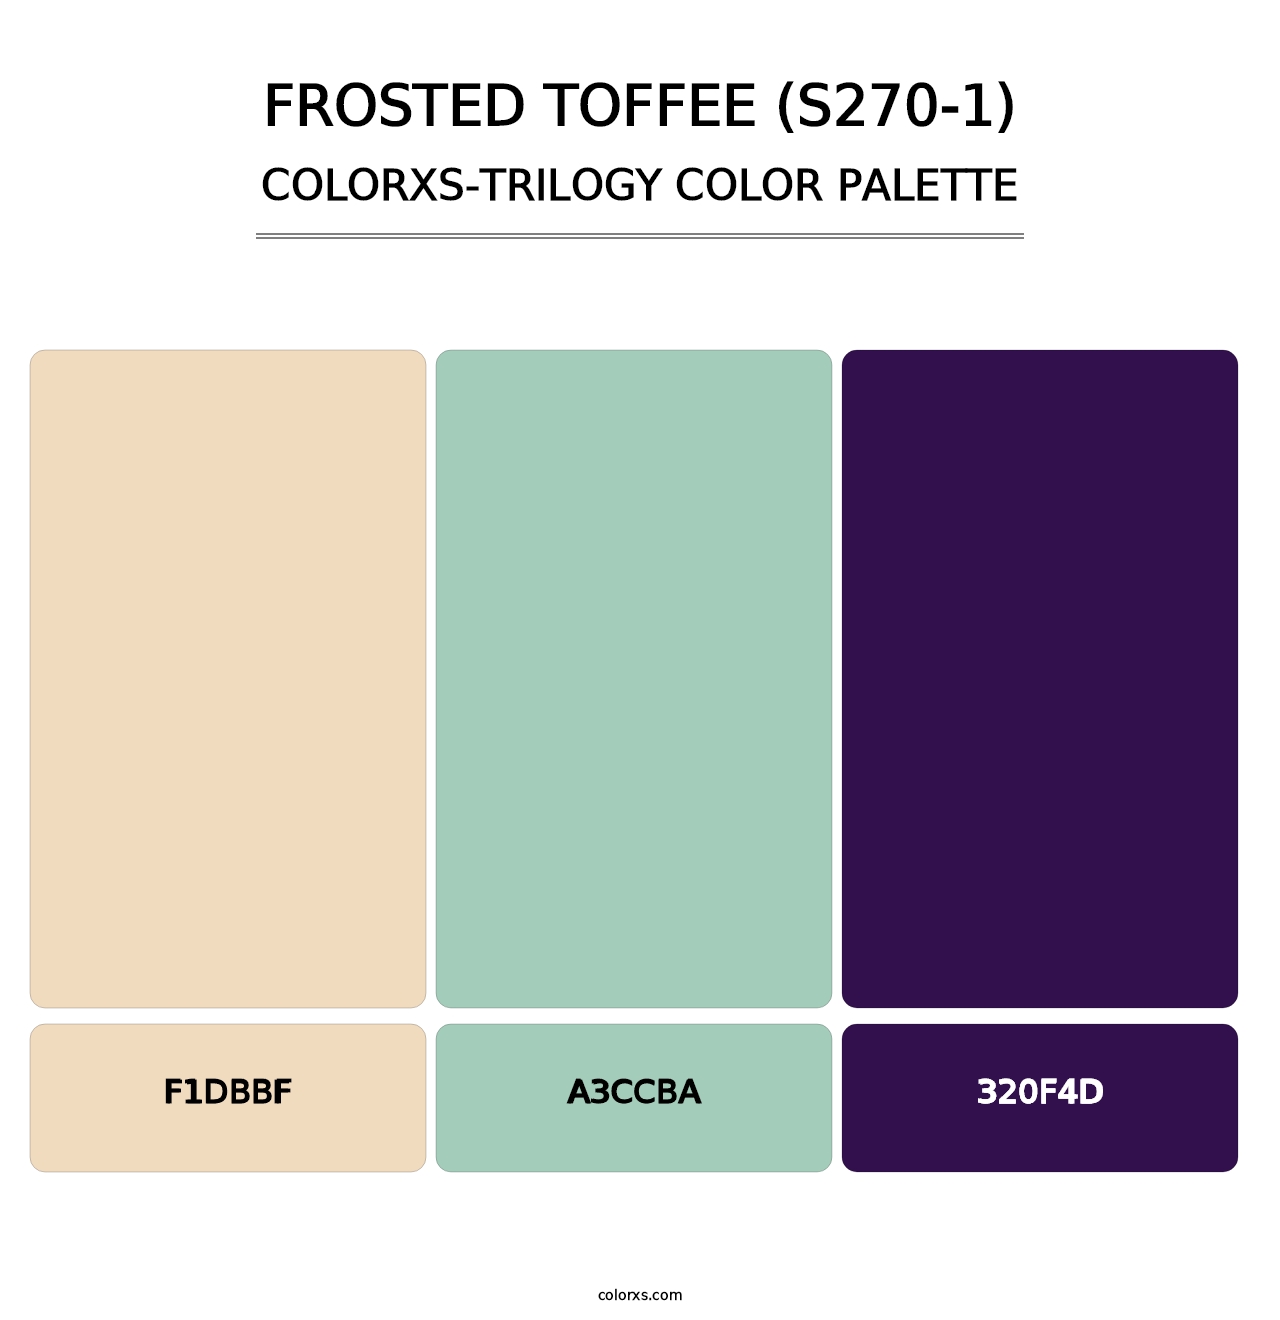 Frosted Toffee (S270-1) - Colorxs Trilogy Palette